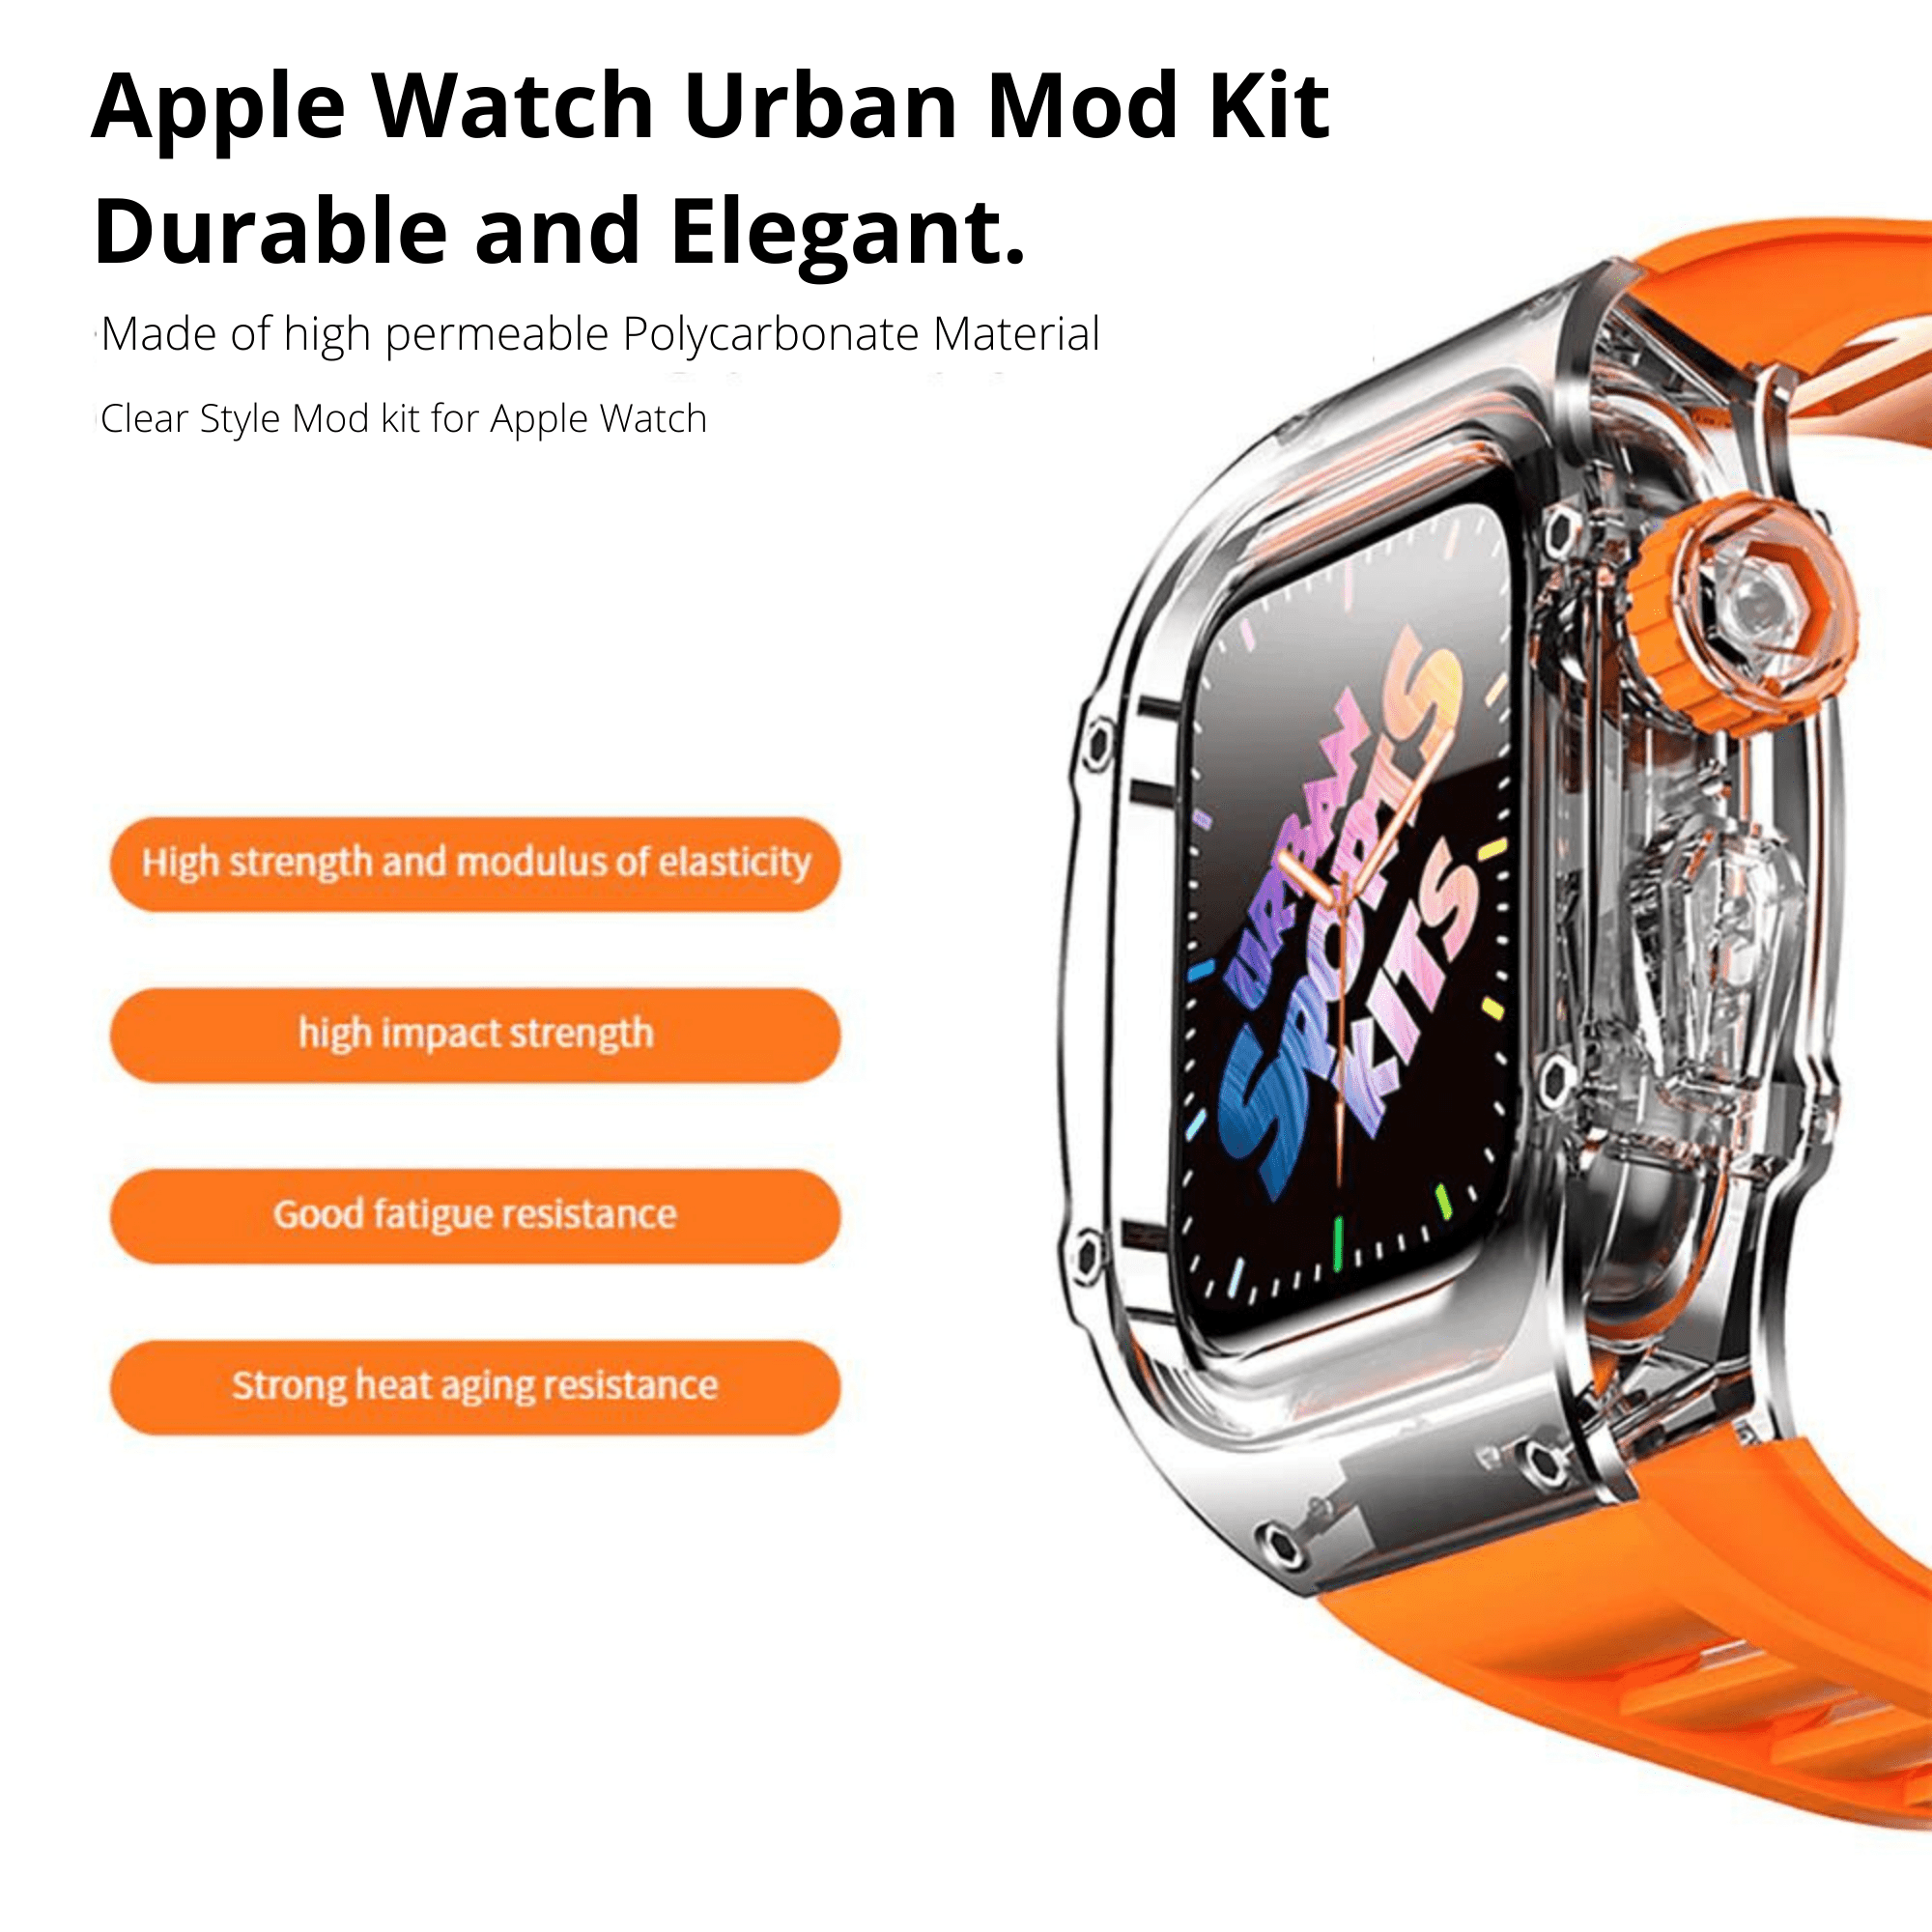 Mod Kit for Apple Watch | Luxury & Sporty Apple Watch Case | Replacement Apple Watch case for SE/3/4/5/6 accessory - 44 mm Bright Grey mod kits india dream watches apple watch